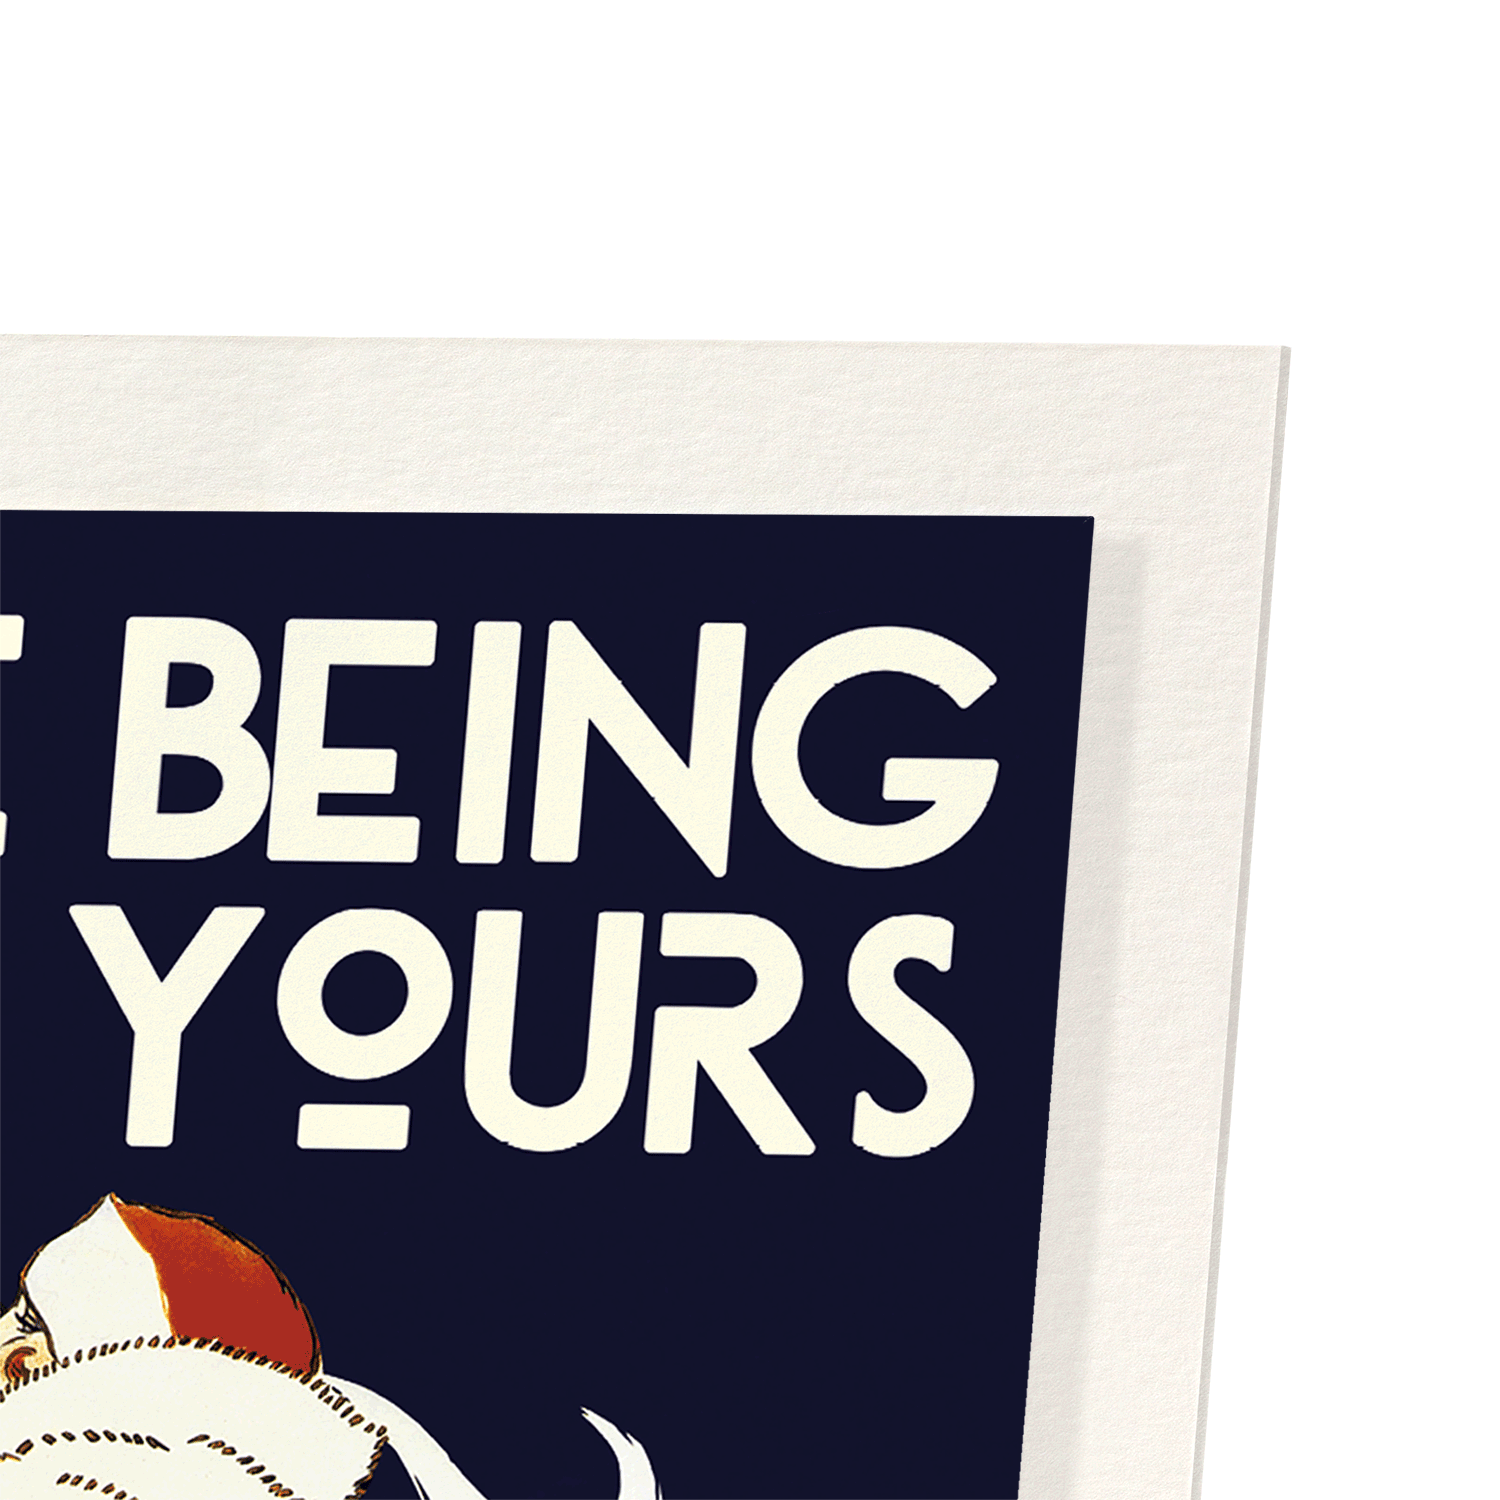 I LOVE BEING YOURS: Vintage Art Print